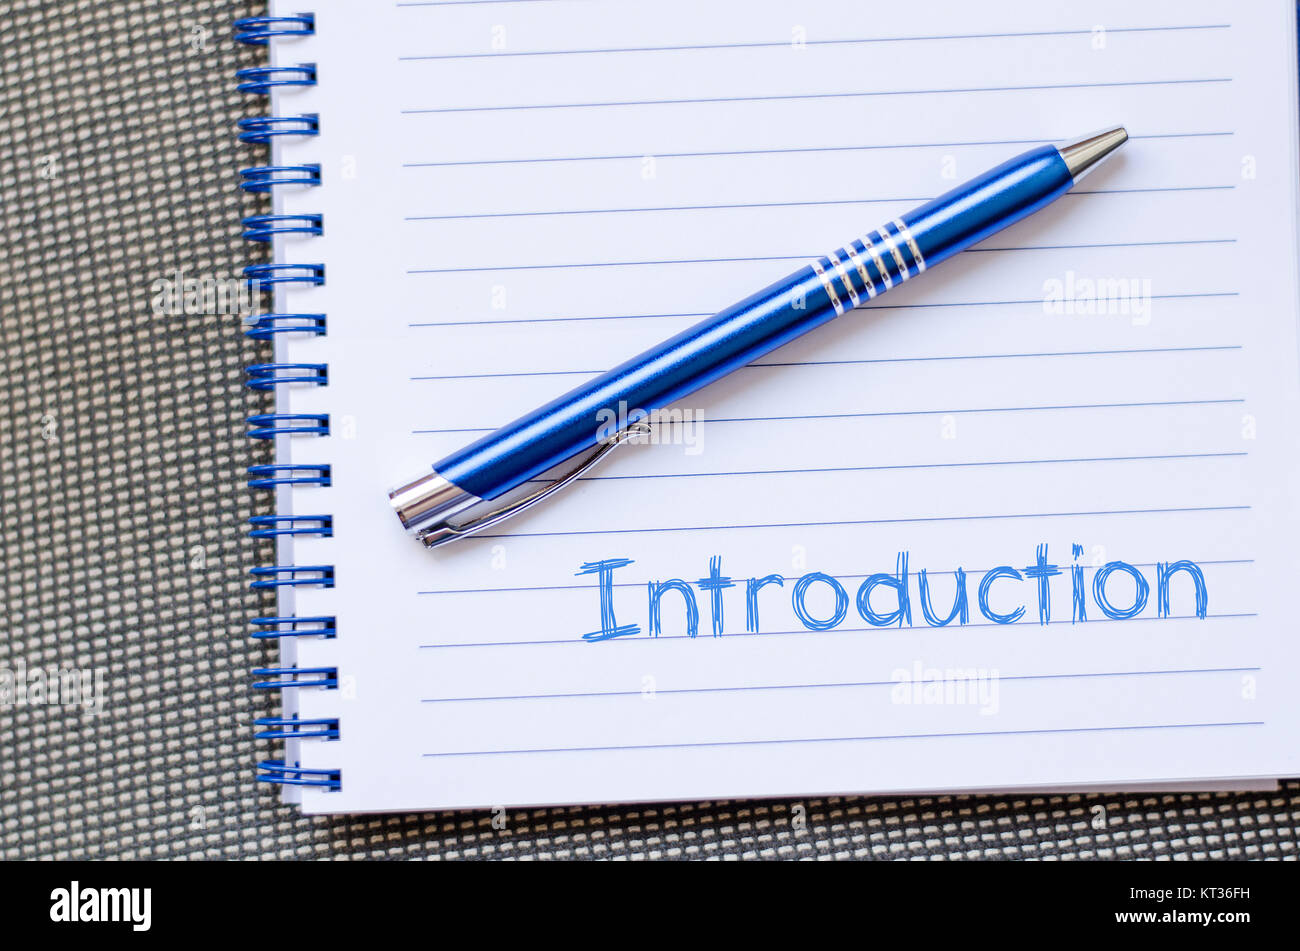 Introduction concept on notebook Stock Photo